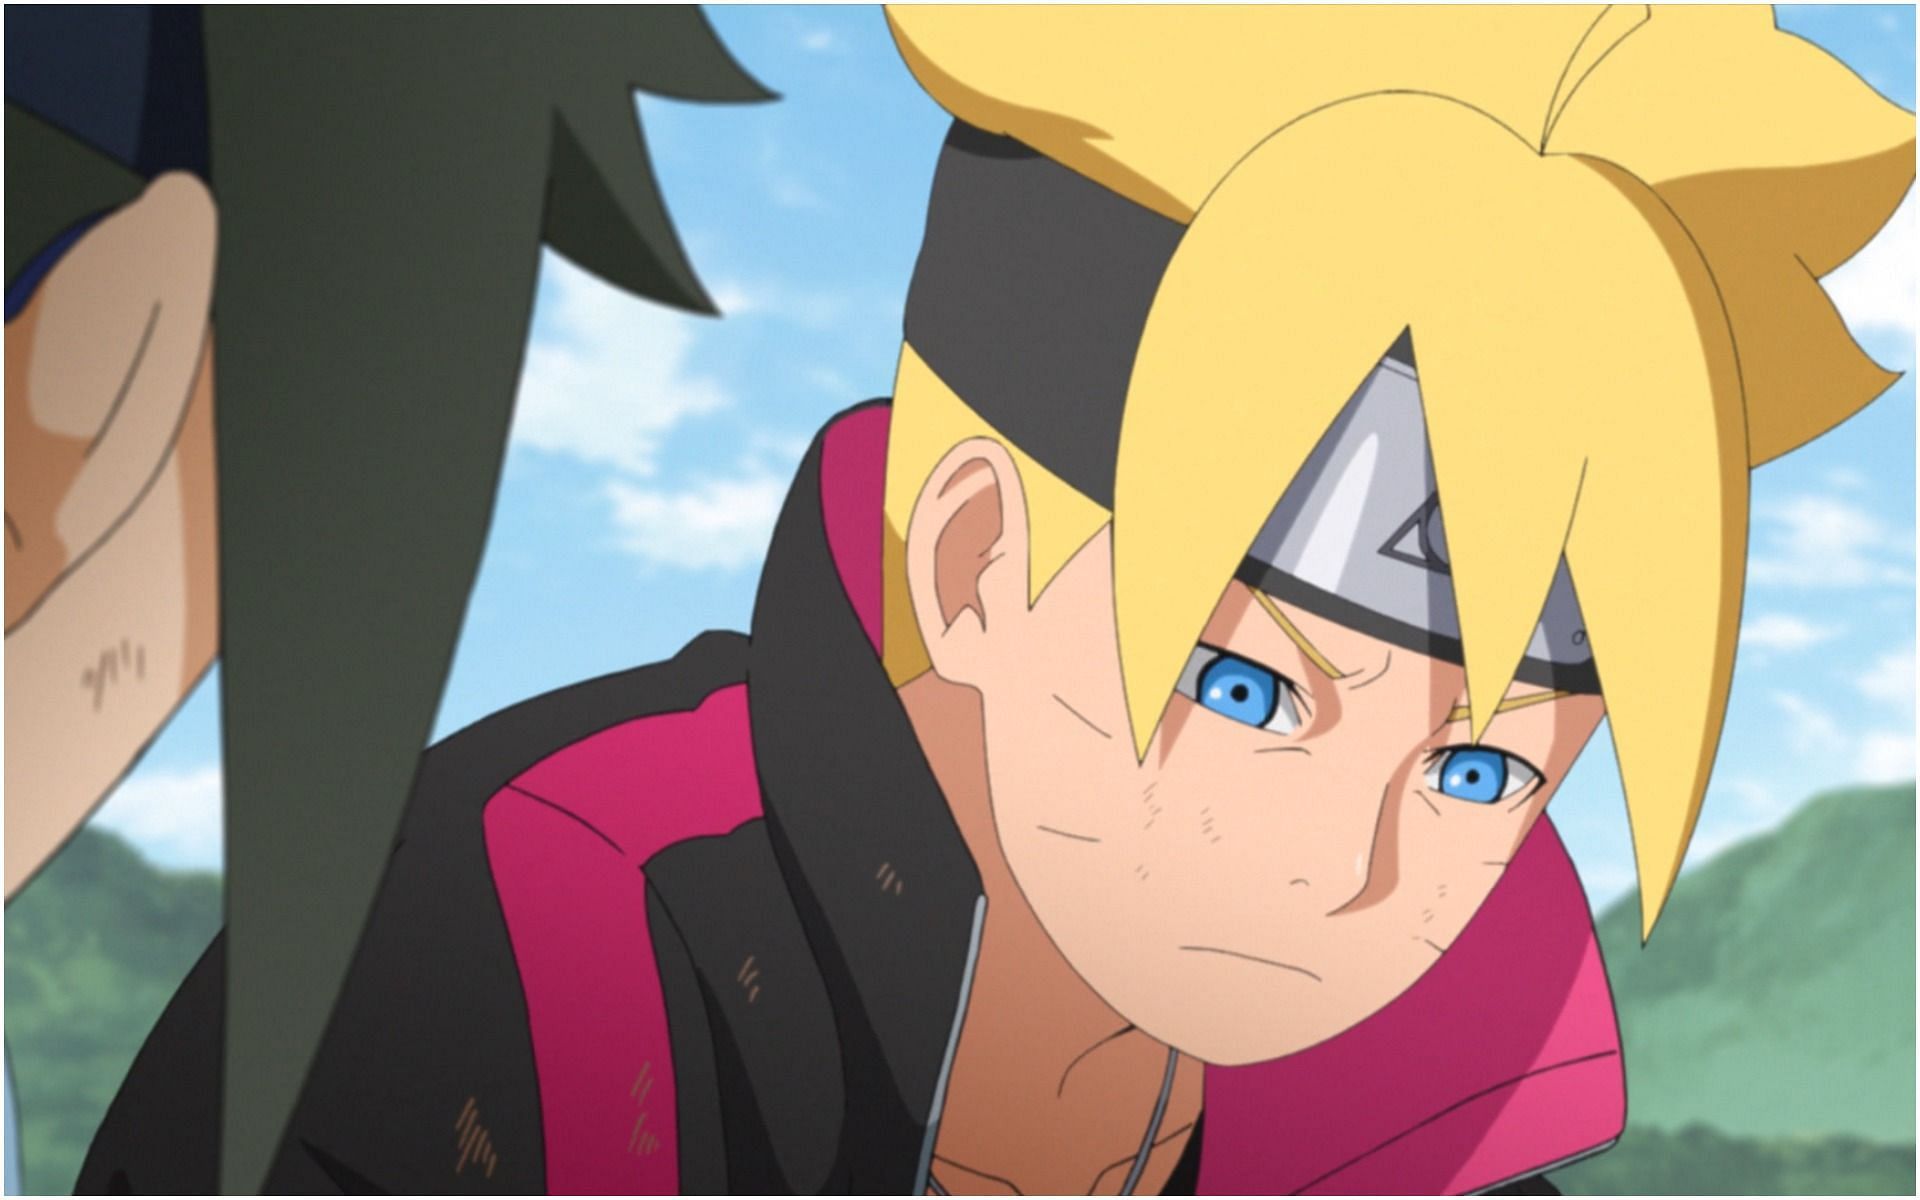 For those complaining about quality, here's a Crunchyroll pic of last week  and this week Boruto and One Piece episodes. Even though I'm partial to the  latter, I say Boruto animation was